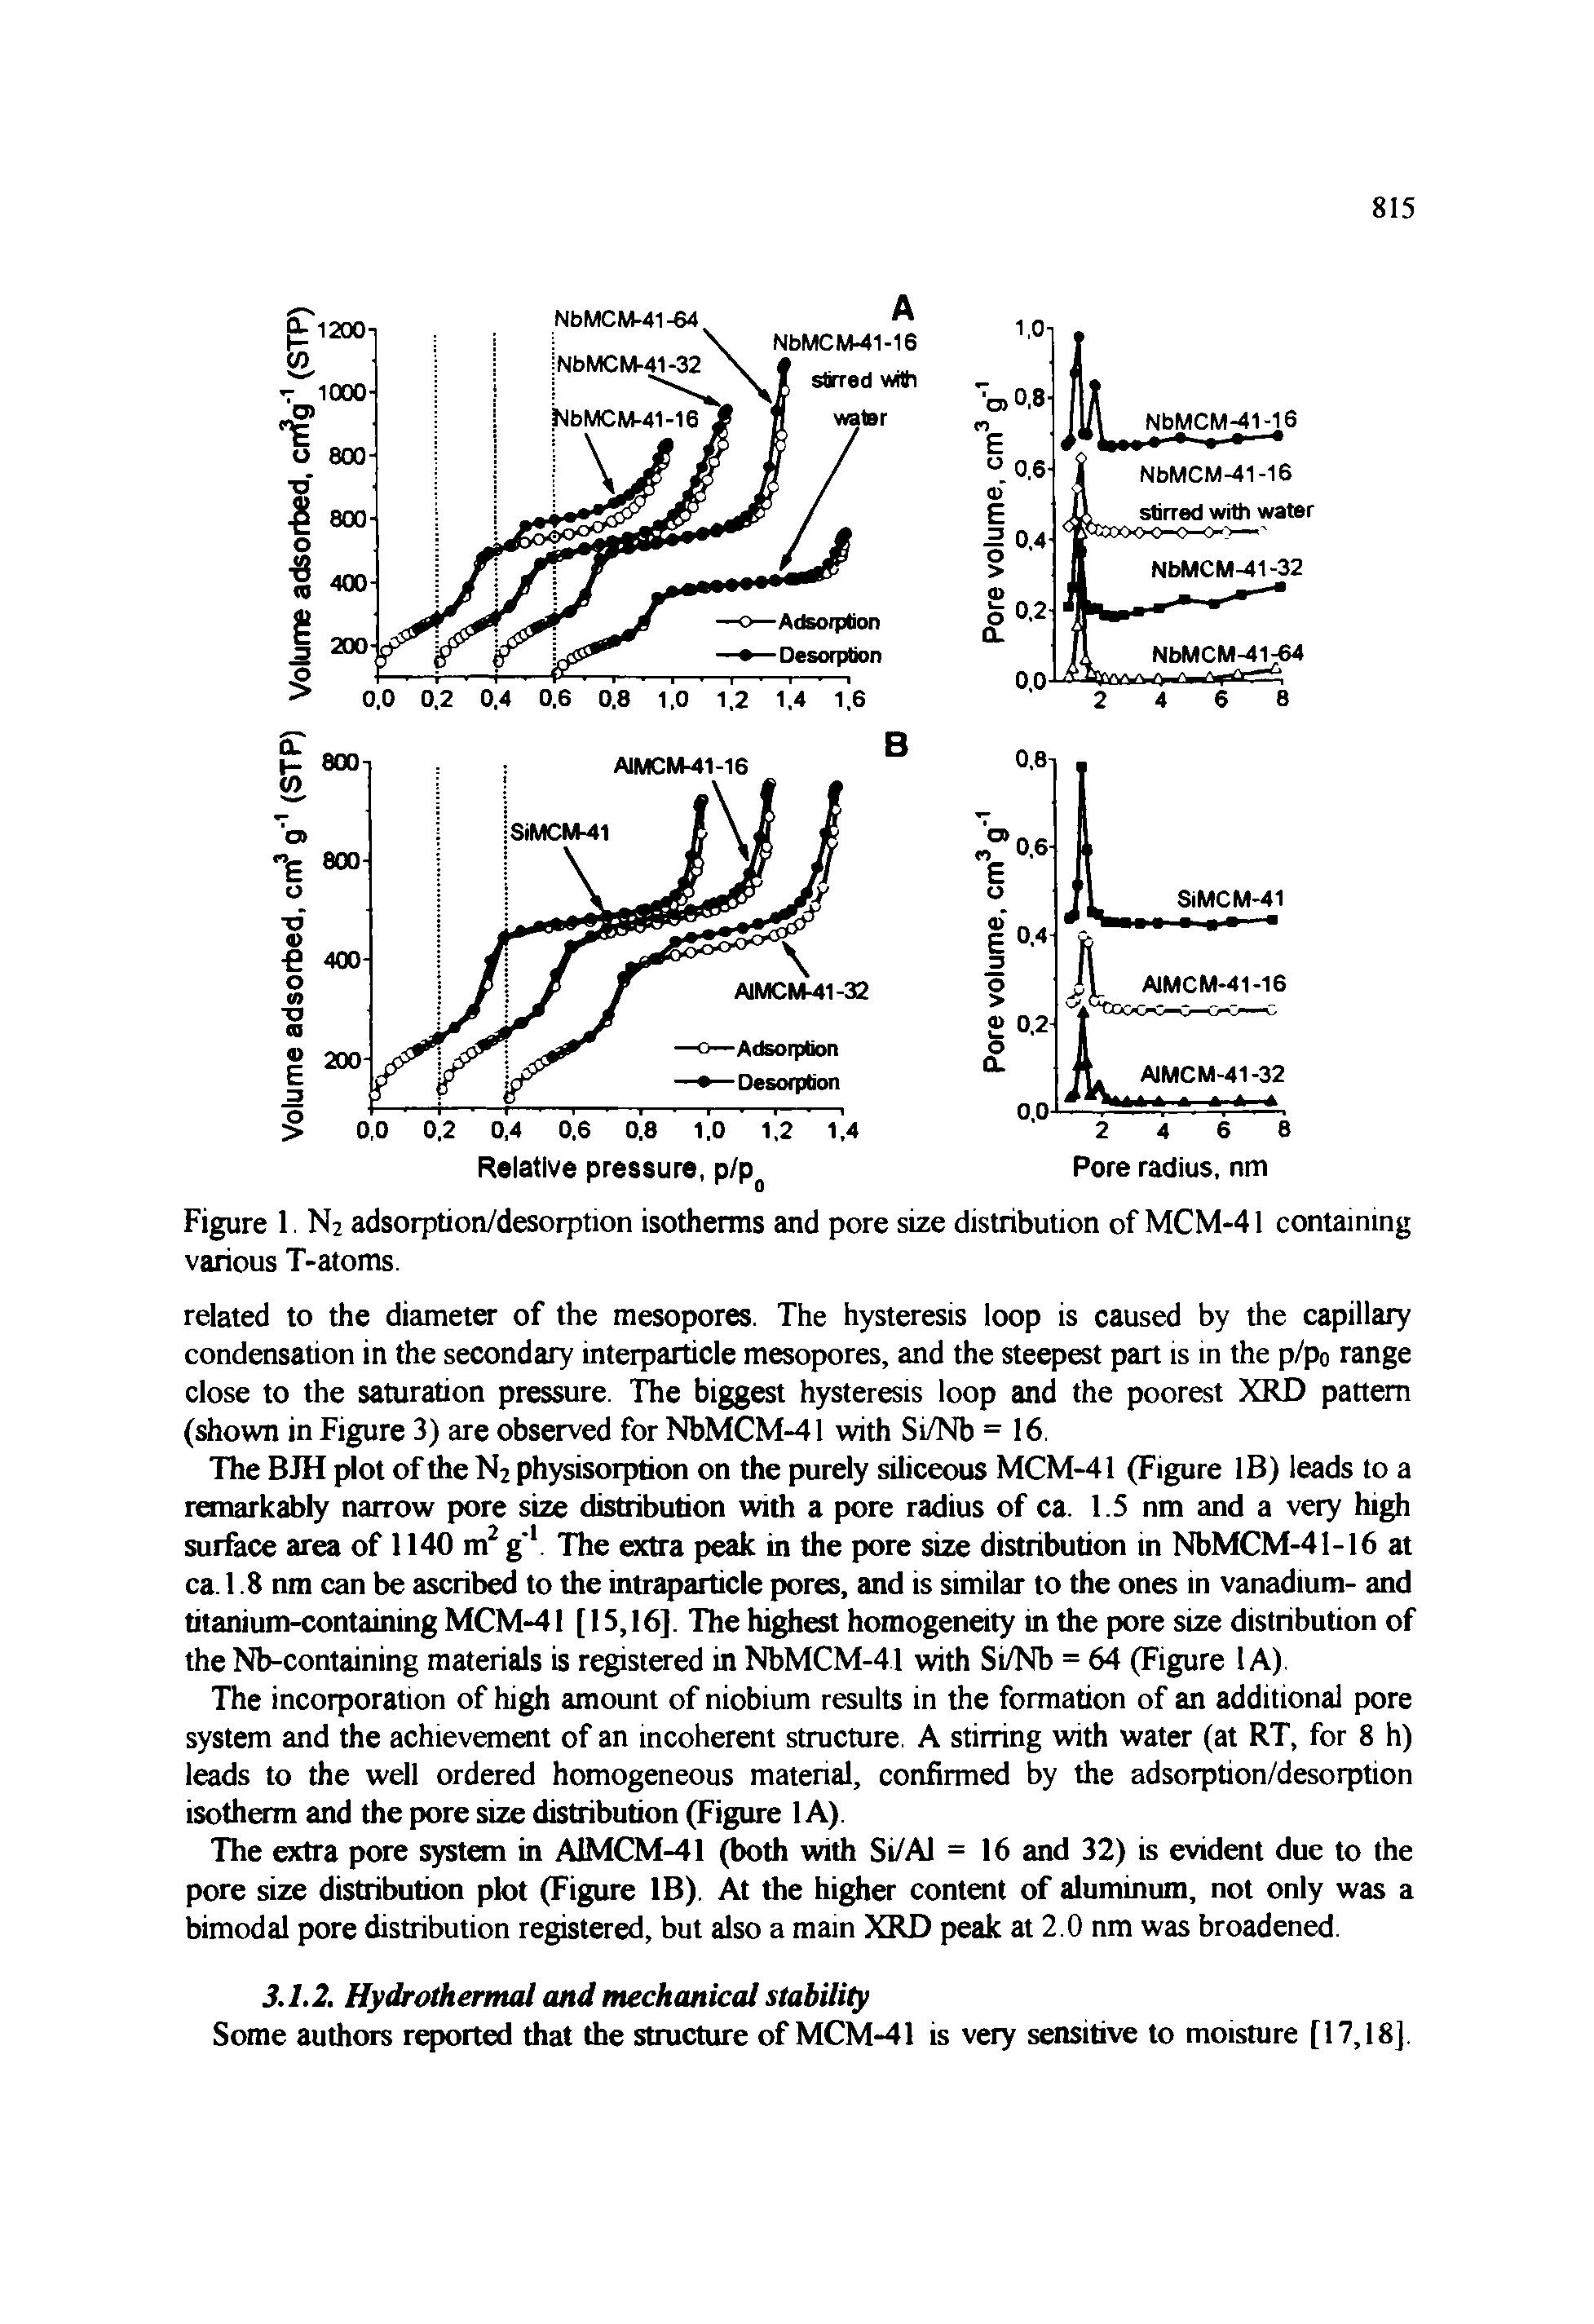 Figure 1. N2 adsorption/desorption isotherms and pore size distribution of MCM-41 containing various T-atoms.